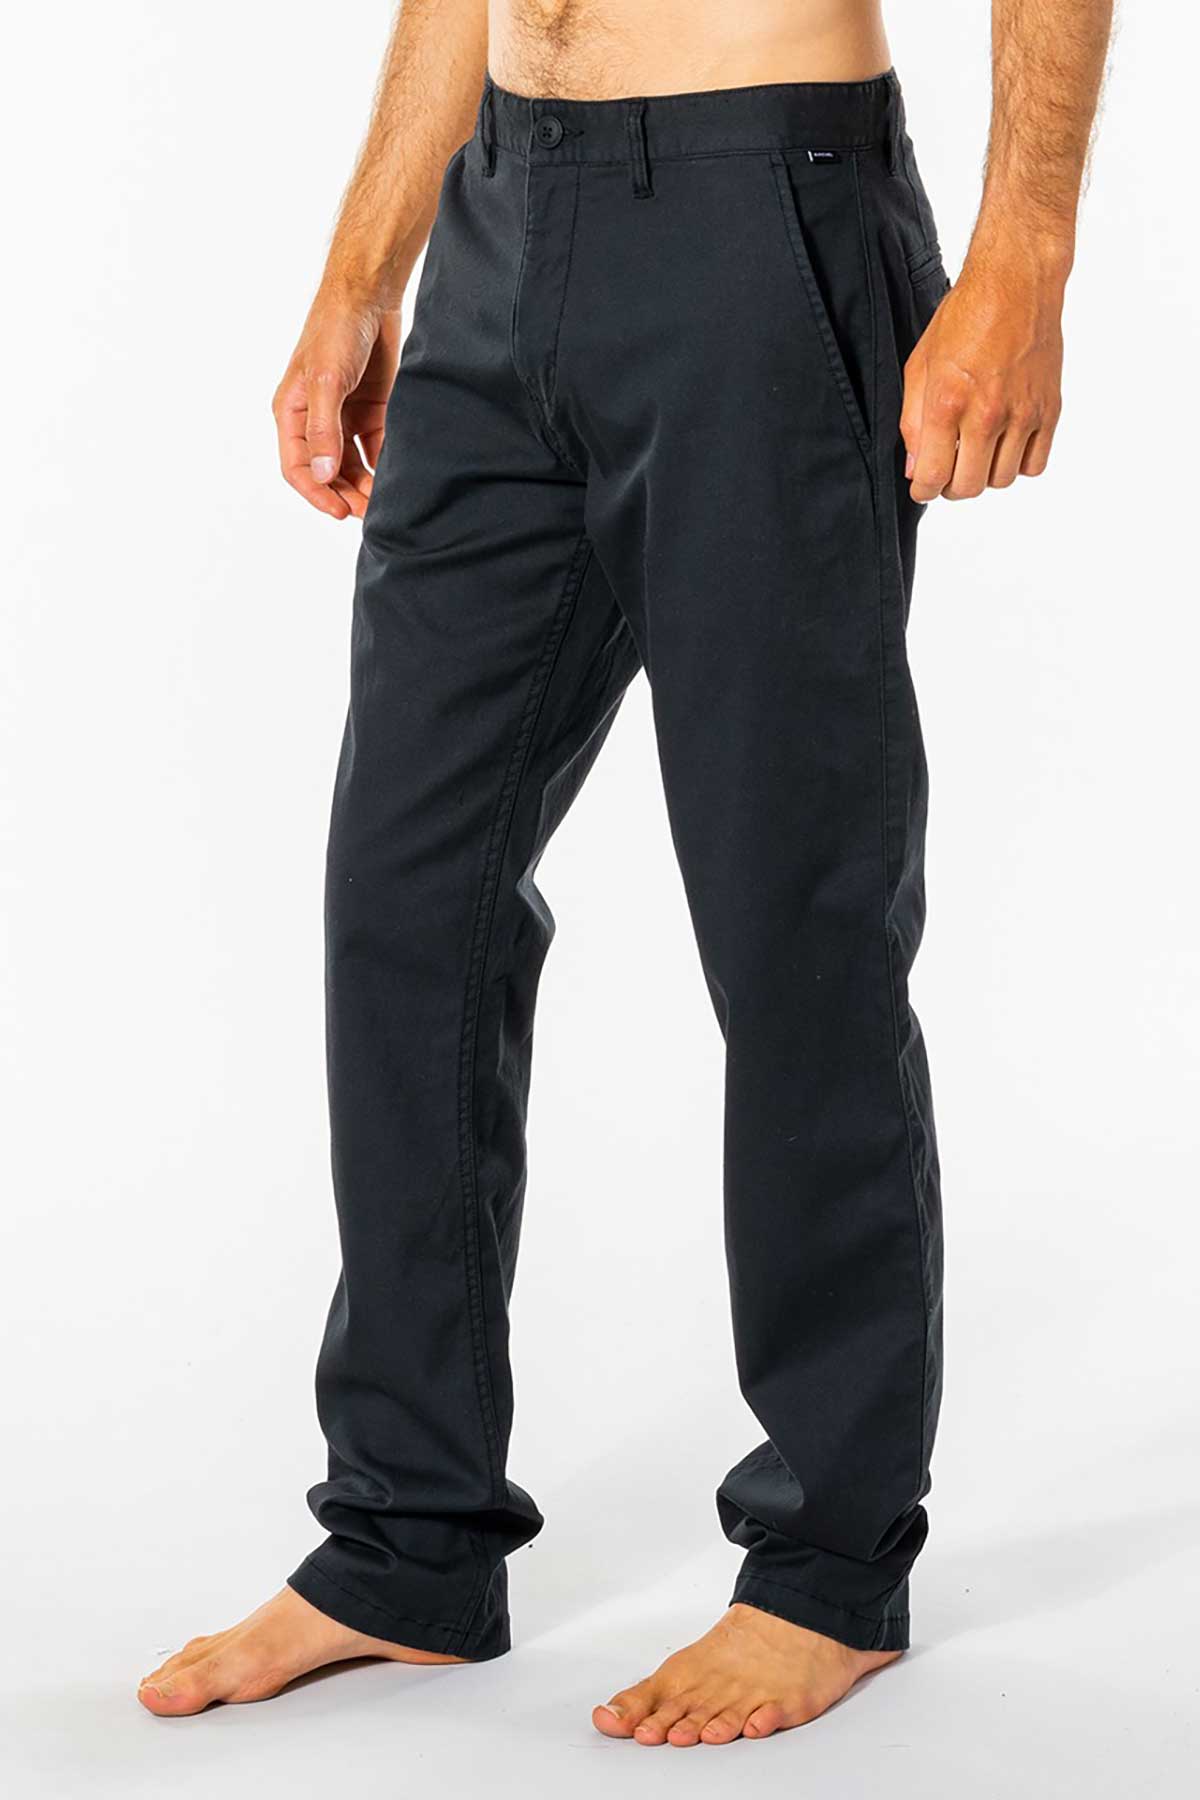 Rip Curl Mens Pant Re Entry Chino in black side view